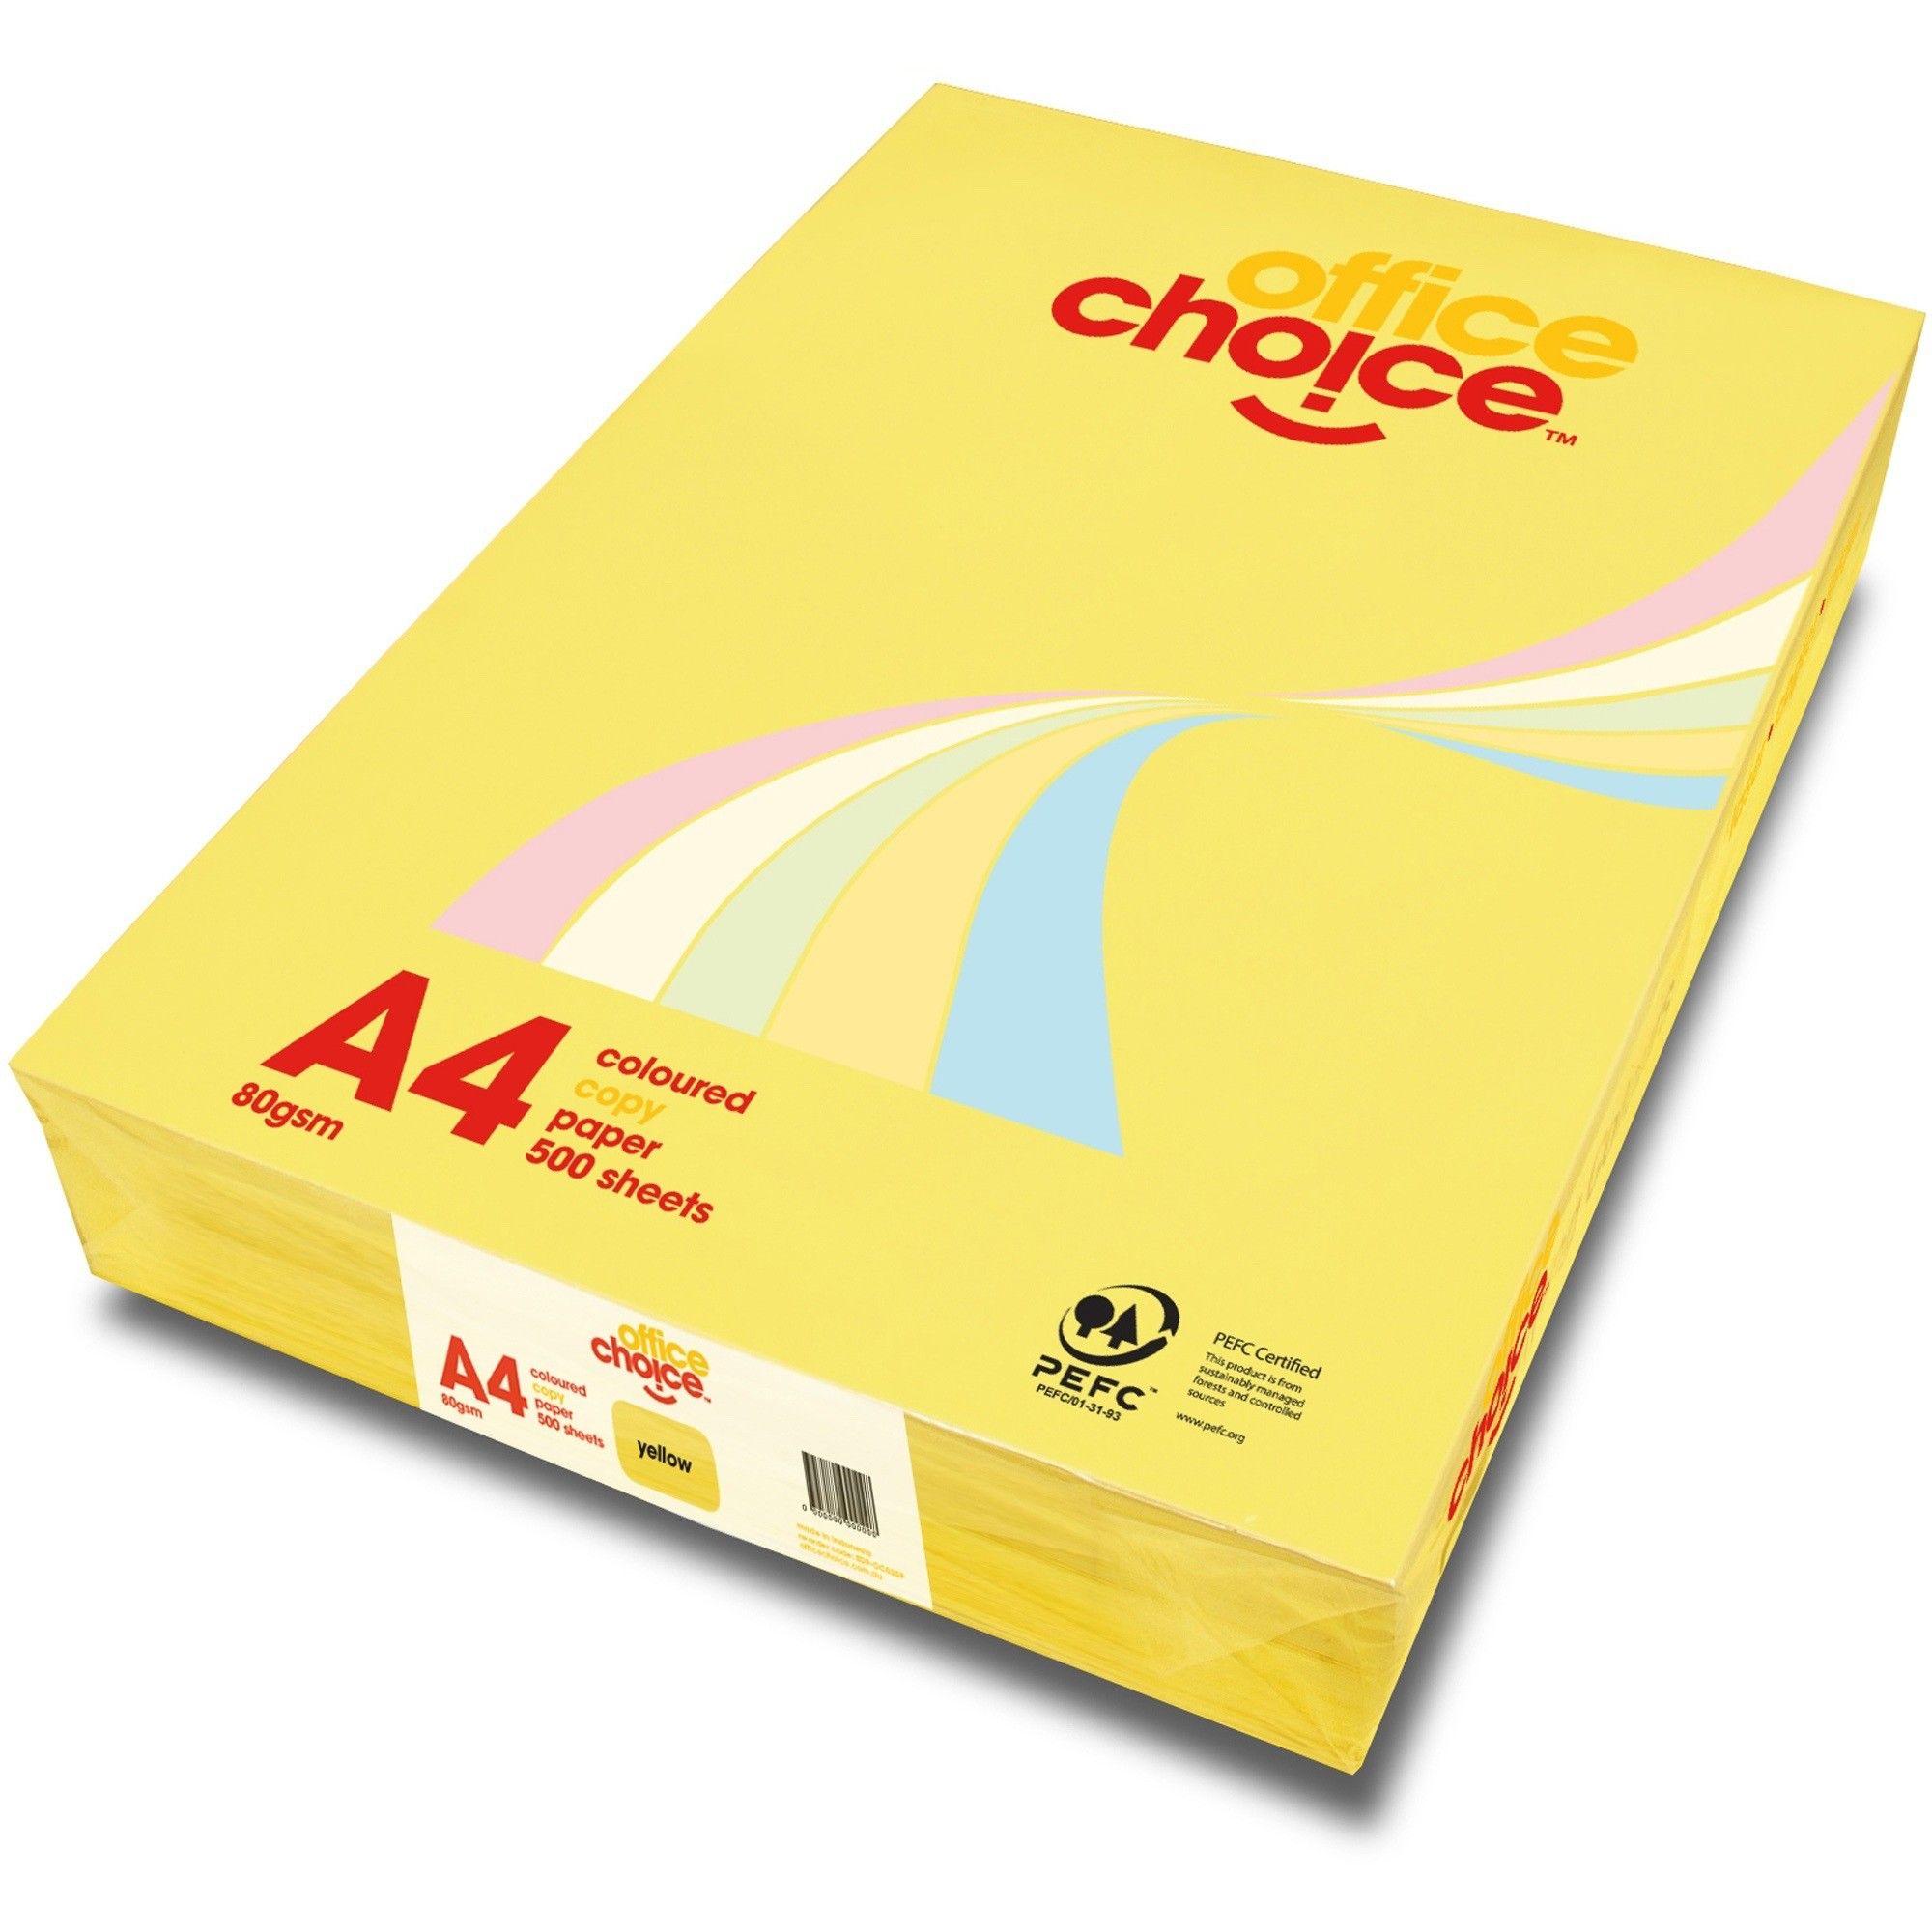 Yellow Sheets of Paper Logo - OFFICE CHOICE 80GSM A4 TINTED Paper Yellow 500 Sheets Ream